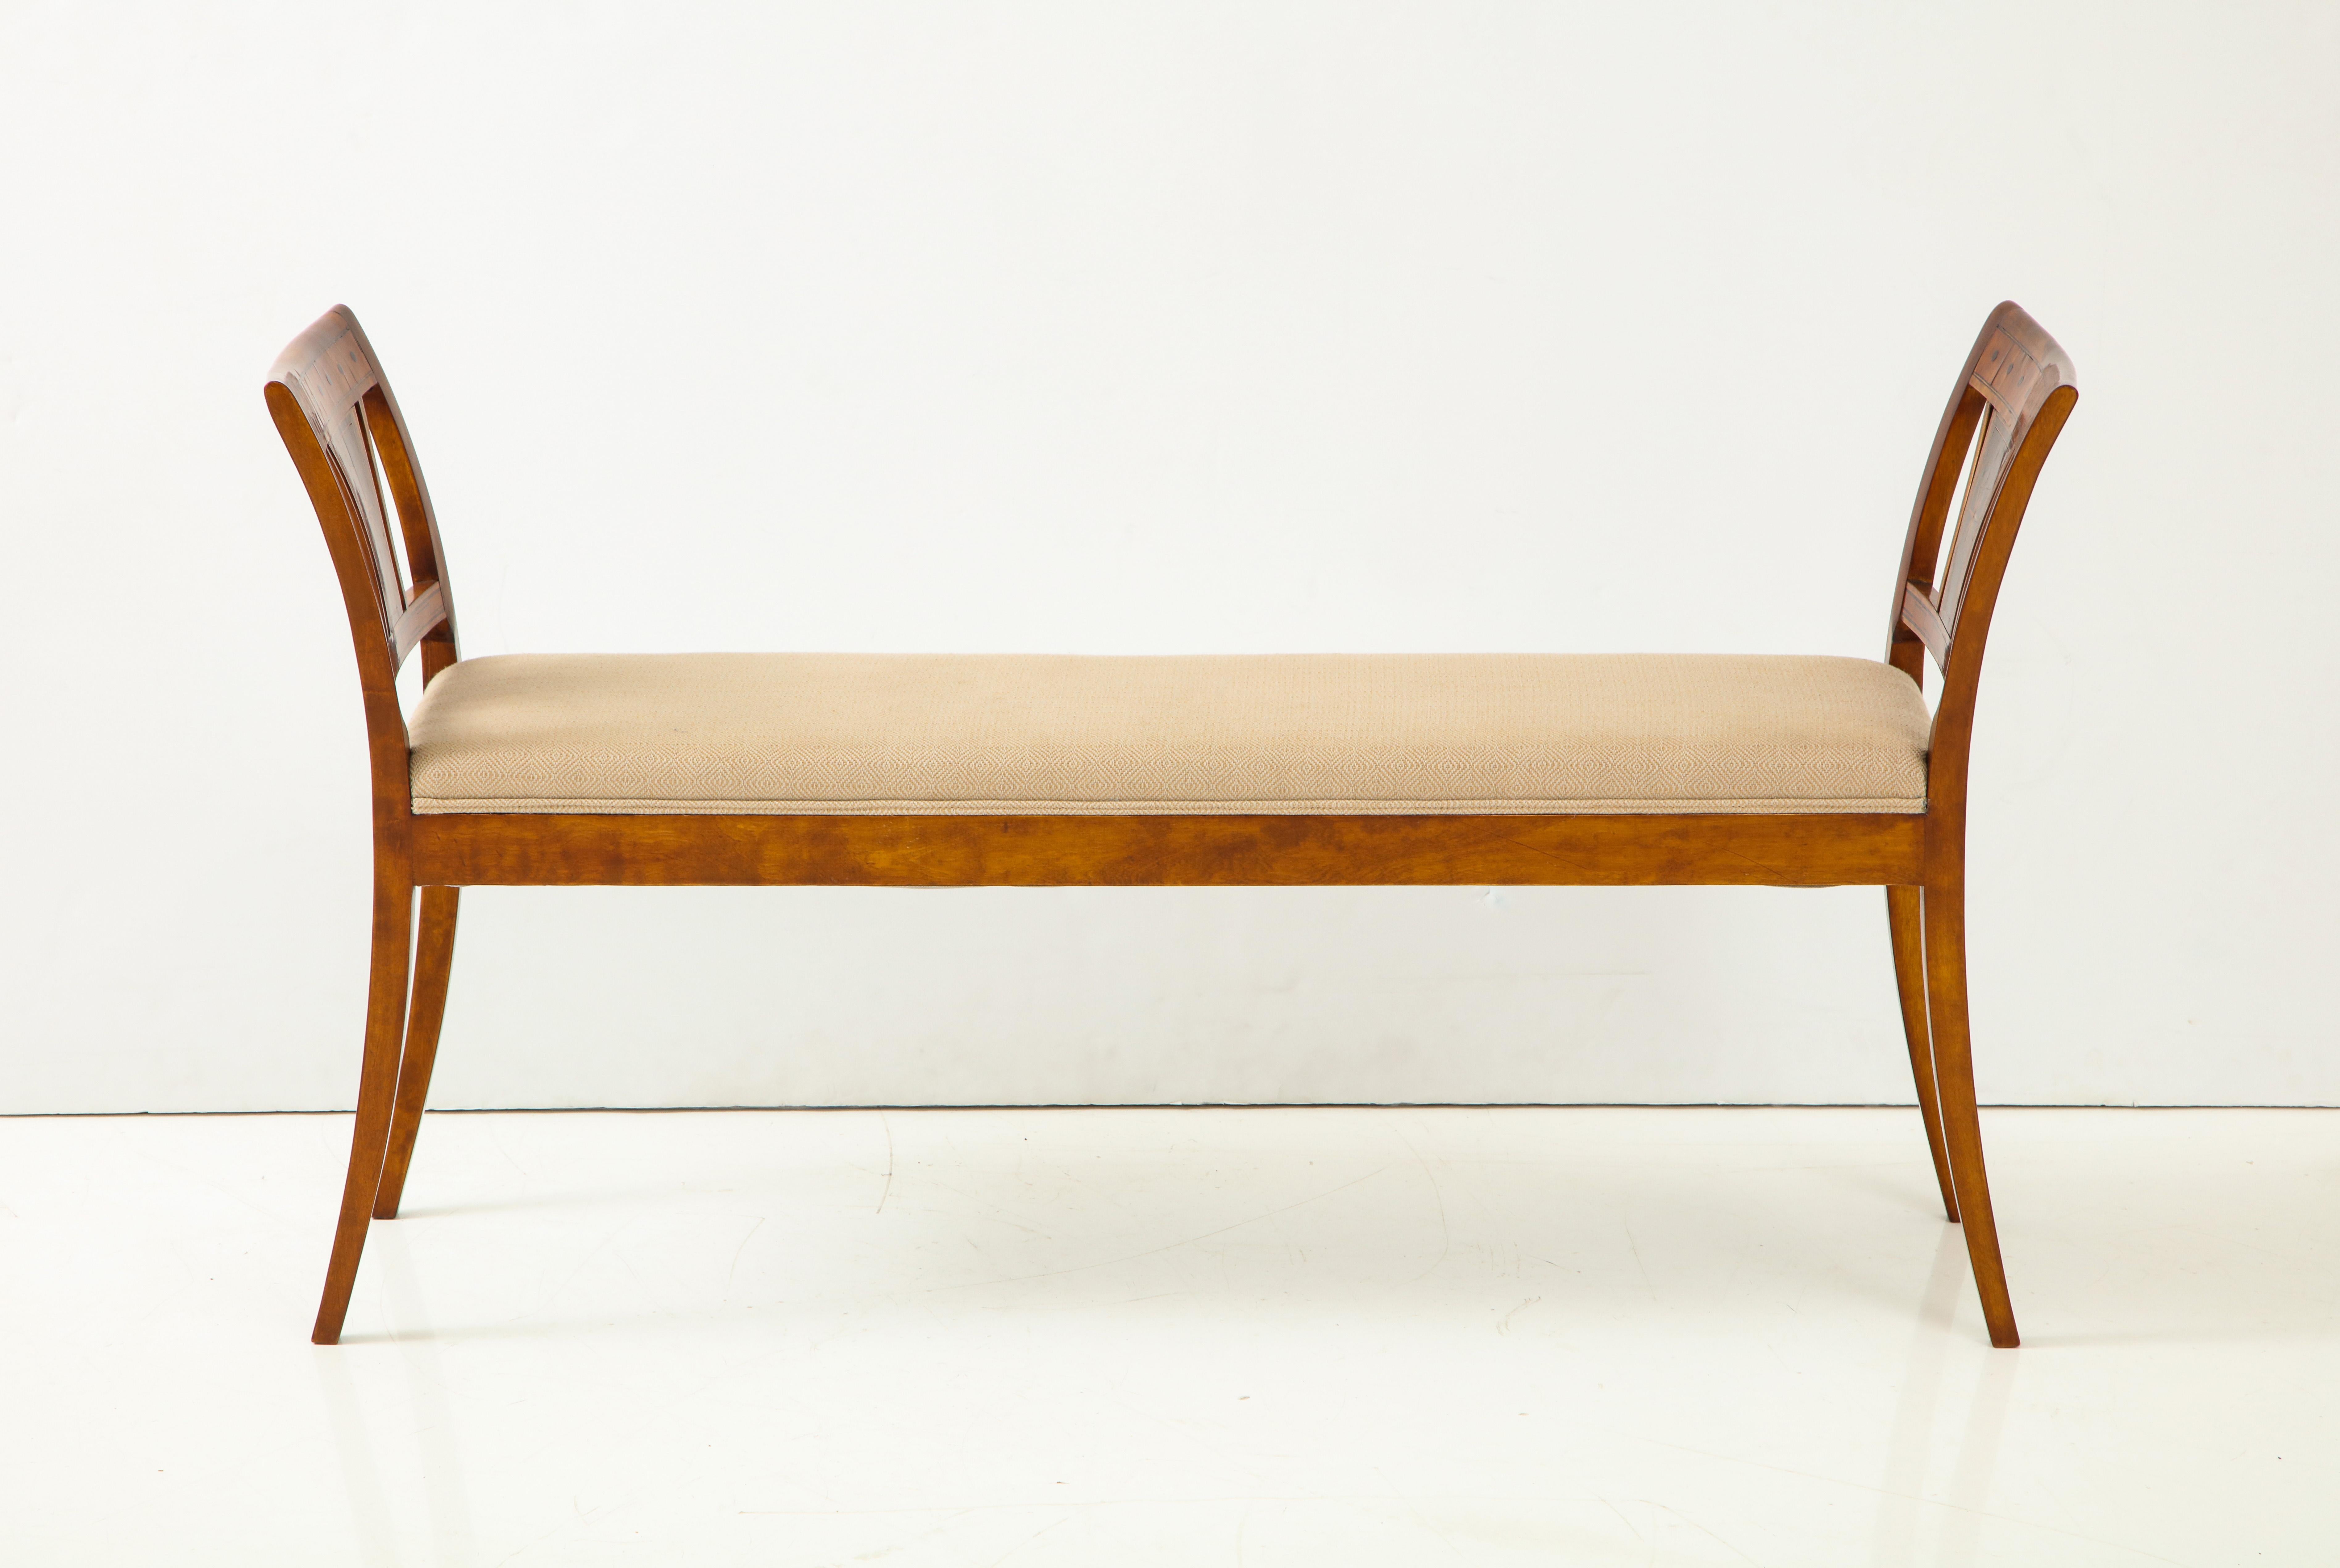 A Danish neoclassical birchwood window seat with geo-metric inlays, 19th century, with an upholstered seat between out curved armrests raised on sabre legs.